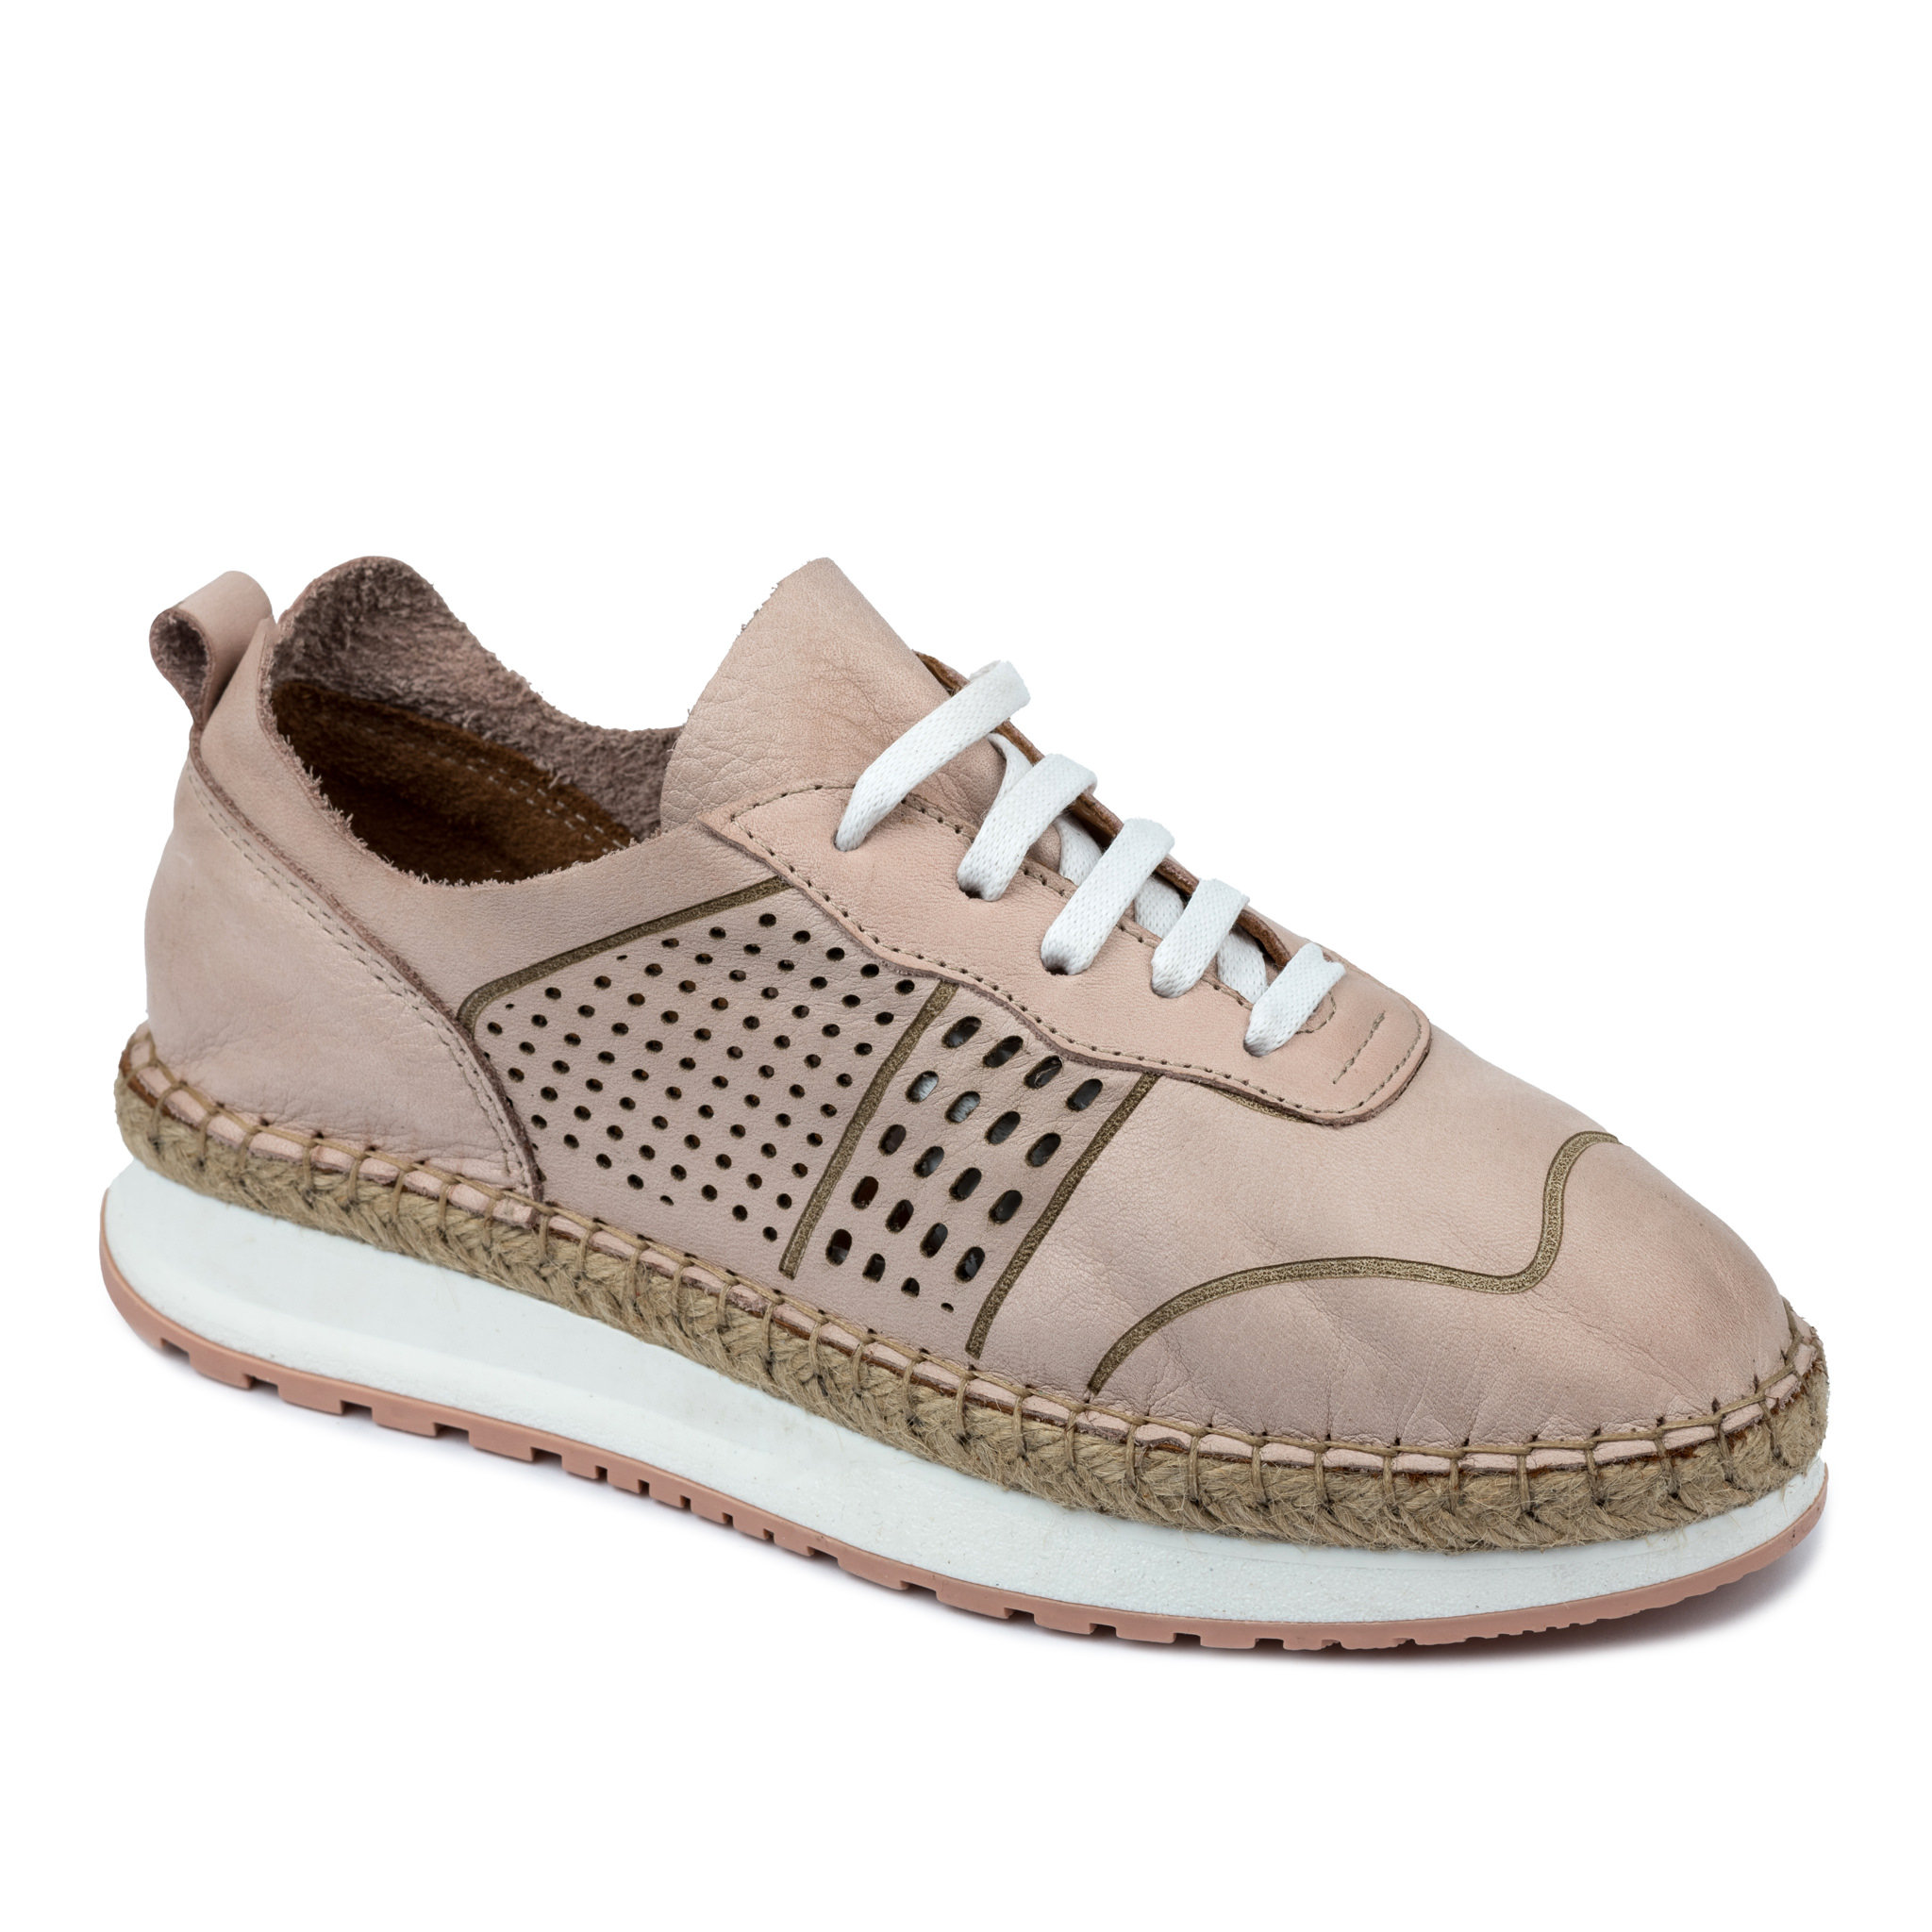 Leather sneakers A547 - ROSE